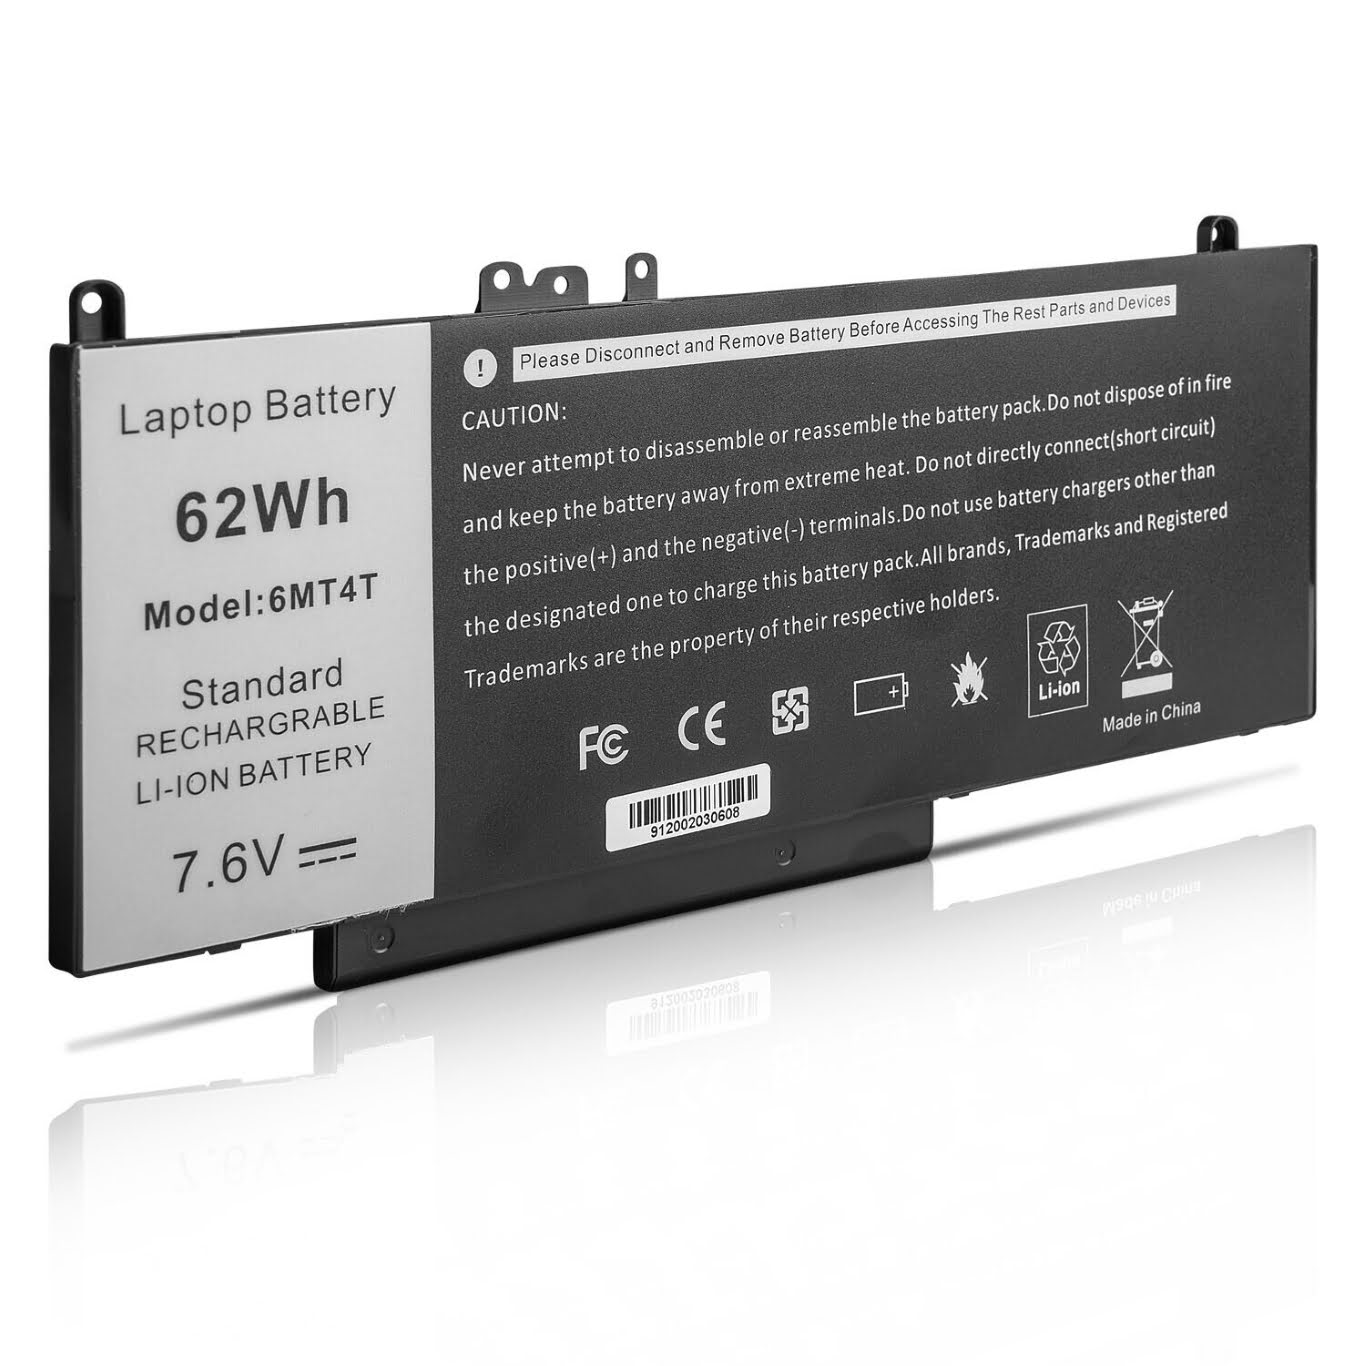 079VRK, 07V69Y replacement Laptop Battery for Dell Latitude E5270 Series, Latitude E5470 Series, 4 cells, 7.6 V, 62 Wh